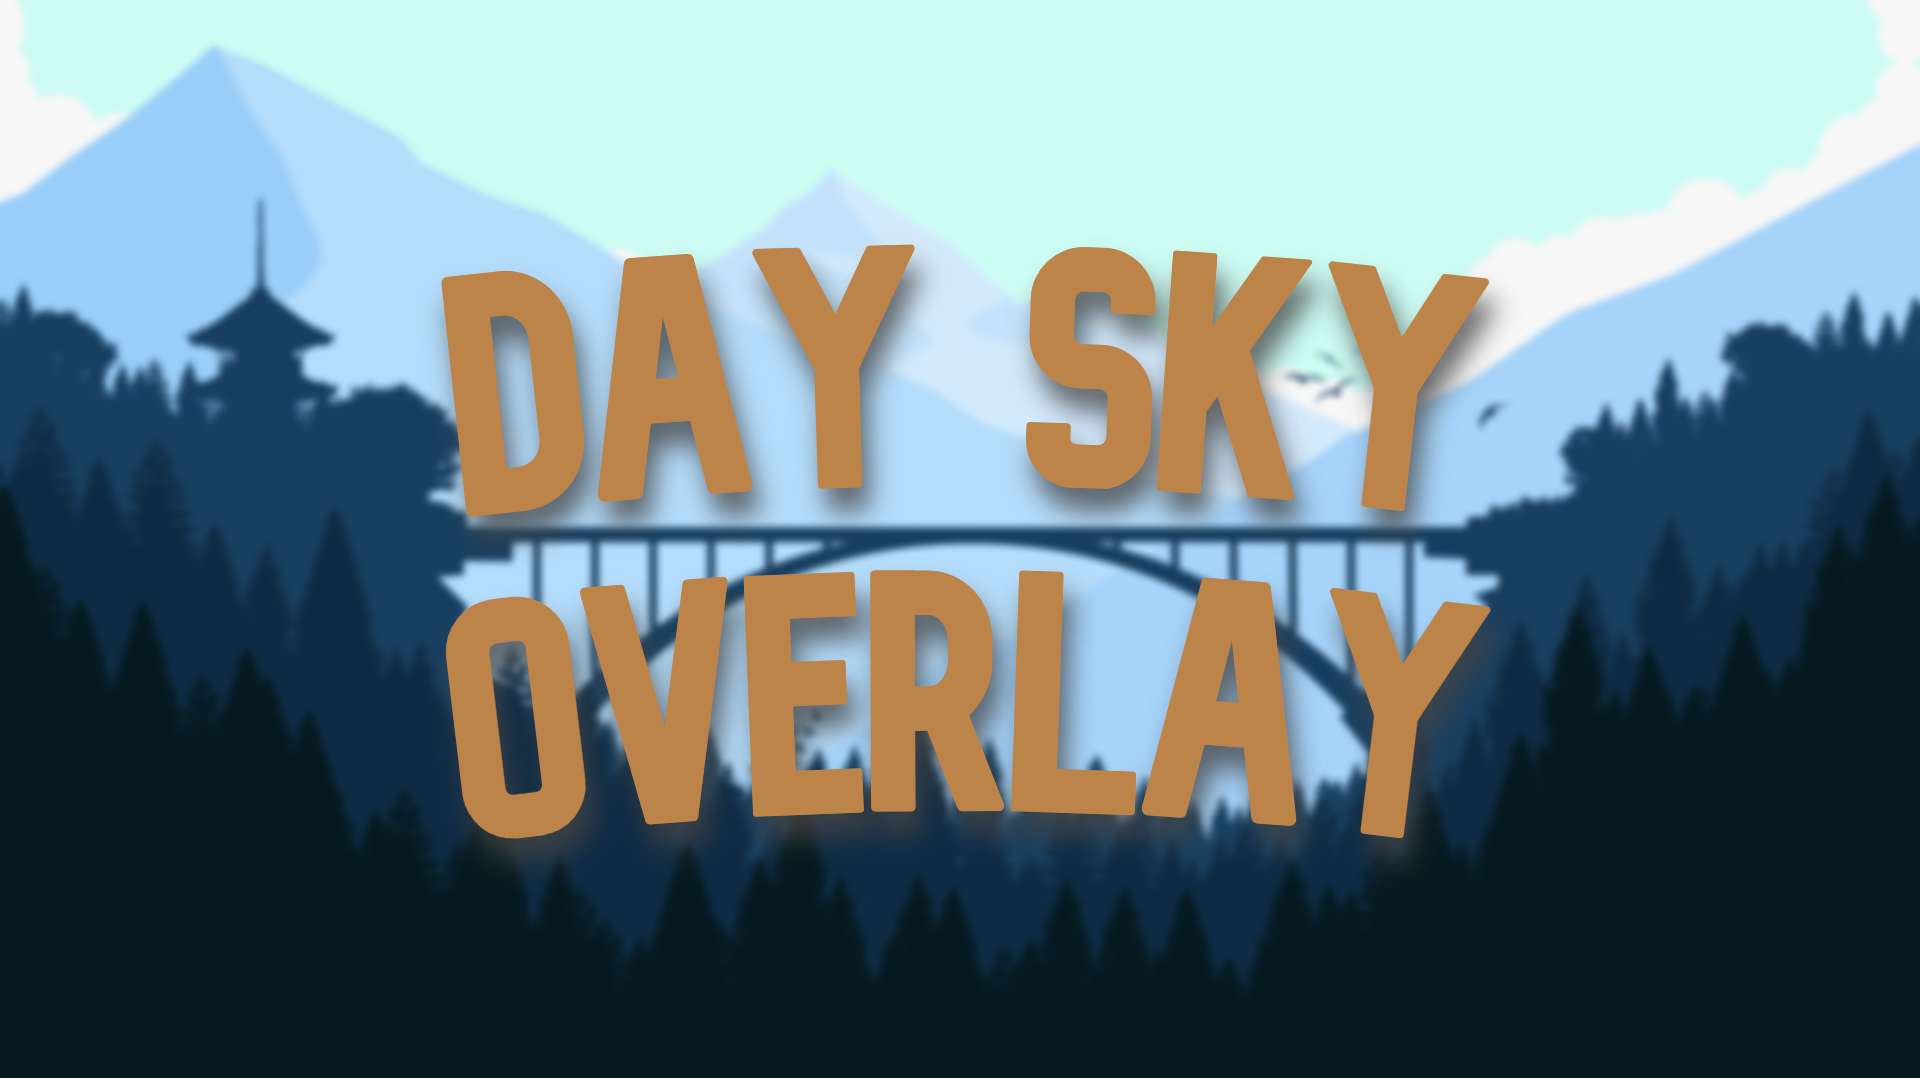 Day Sky Overlay #1 16 by rh56 on PvPRP